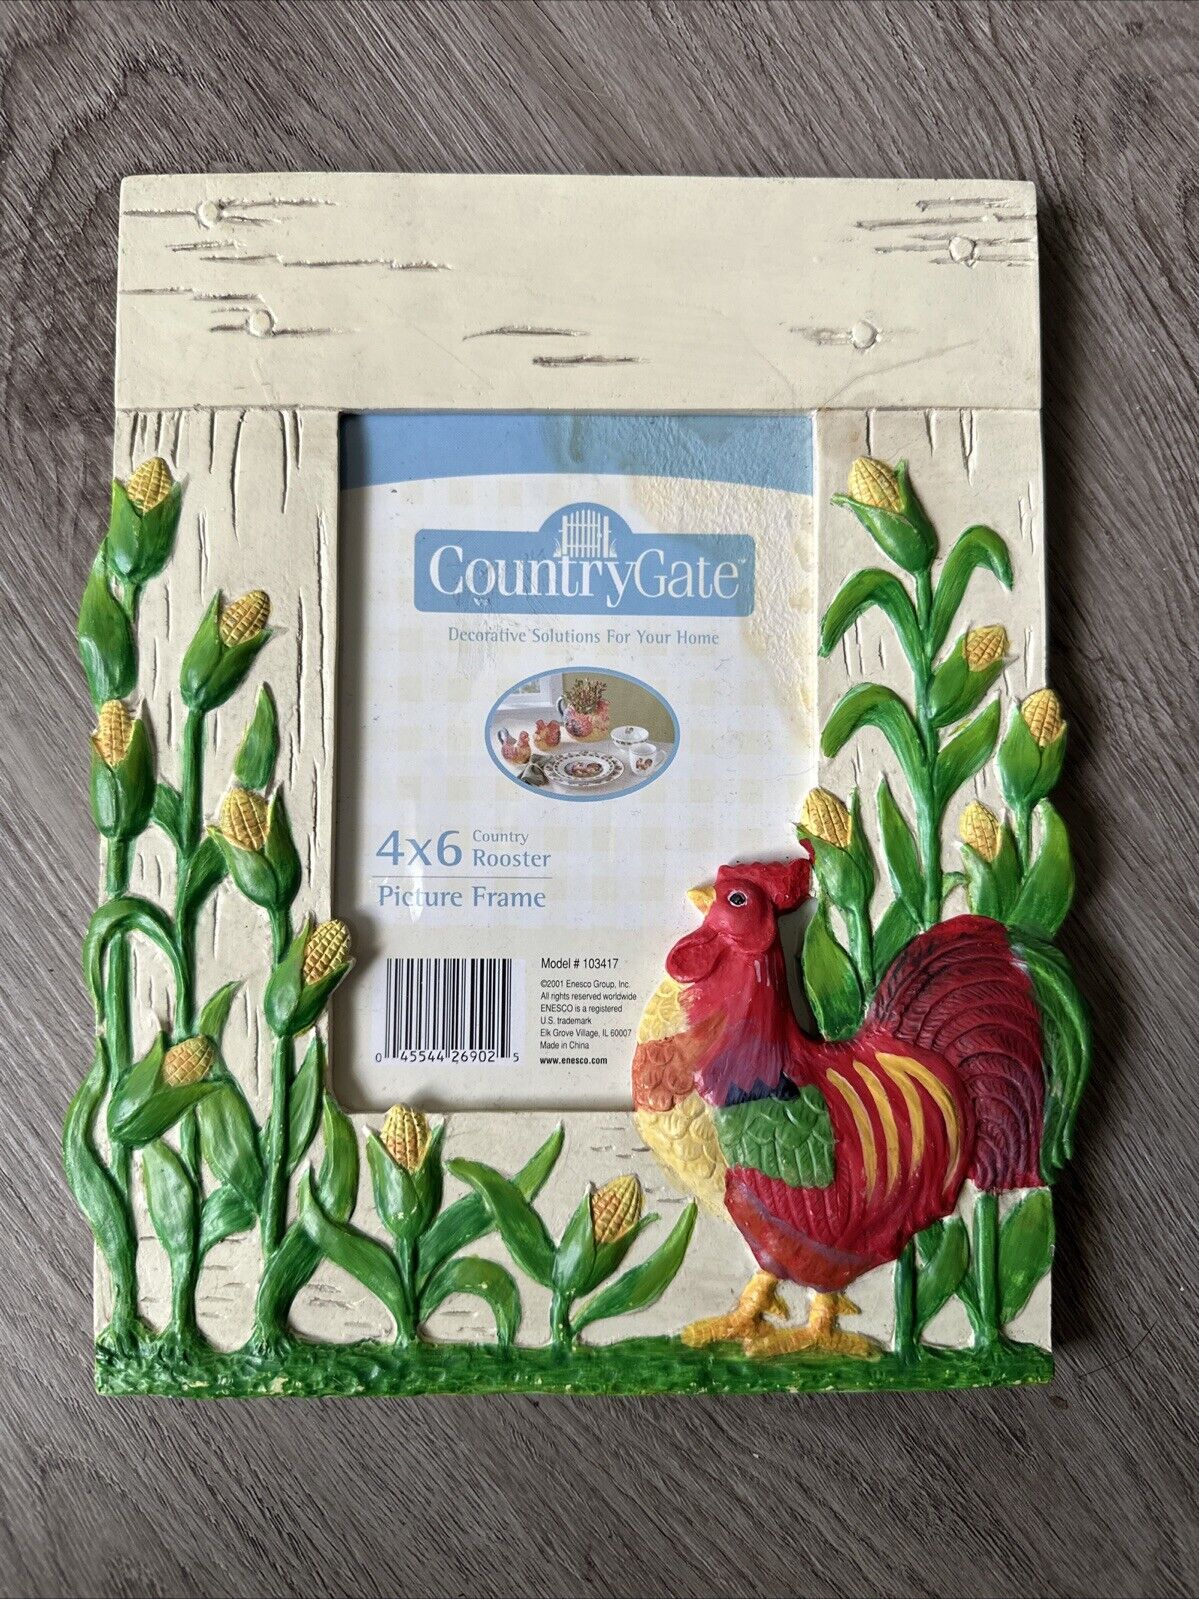 Country Gate Ceramic Resin Rooster Picture Frame / 4 x 6 / Vintage 2001 Enesco